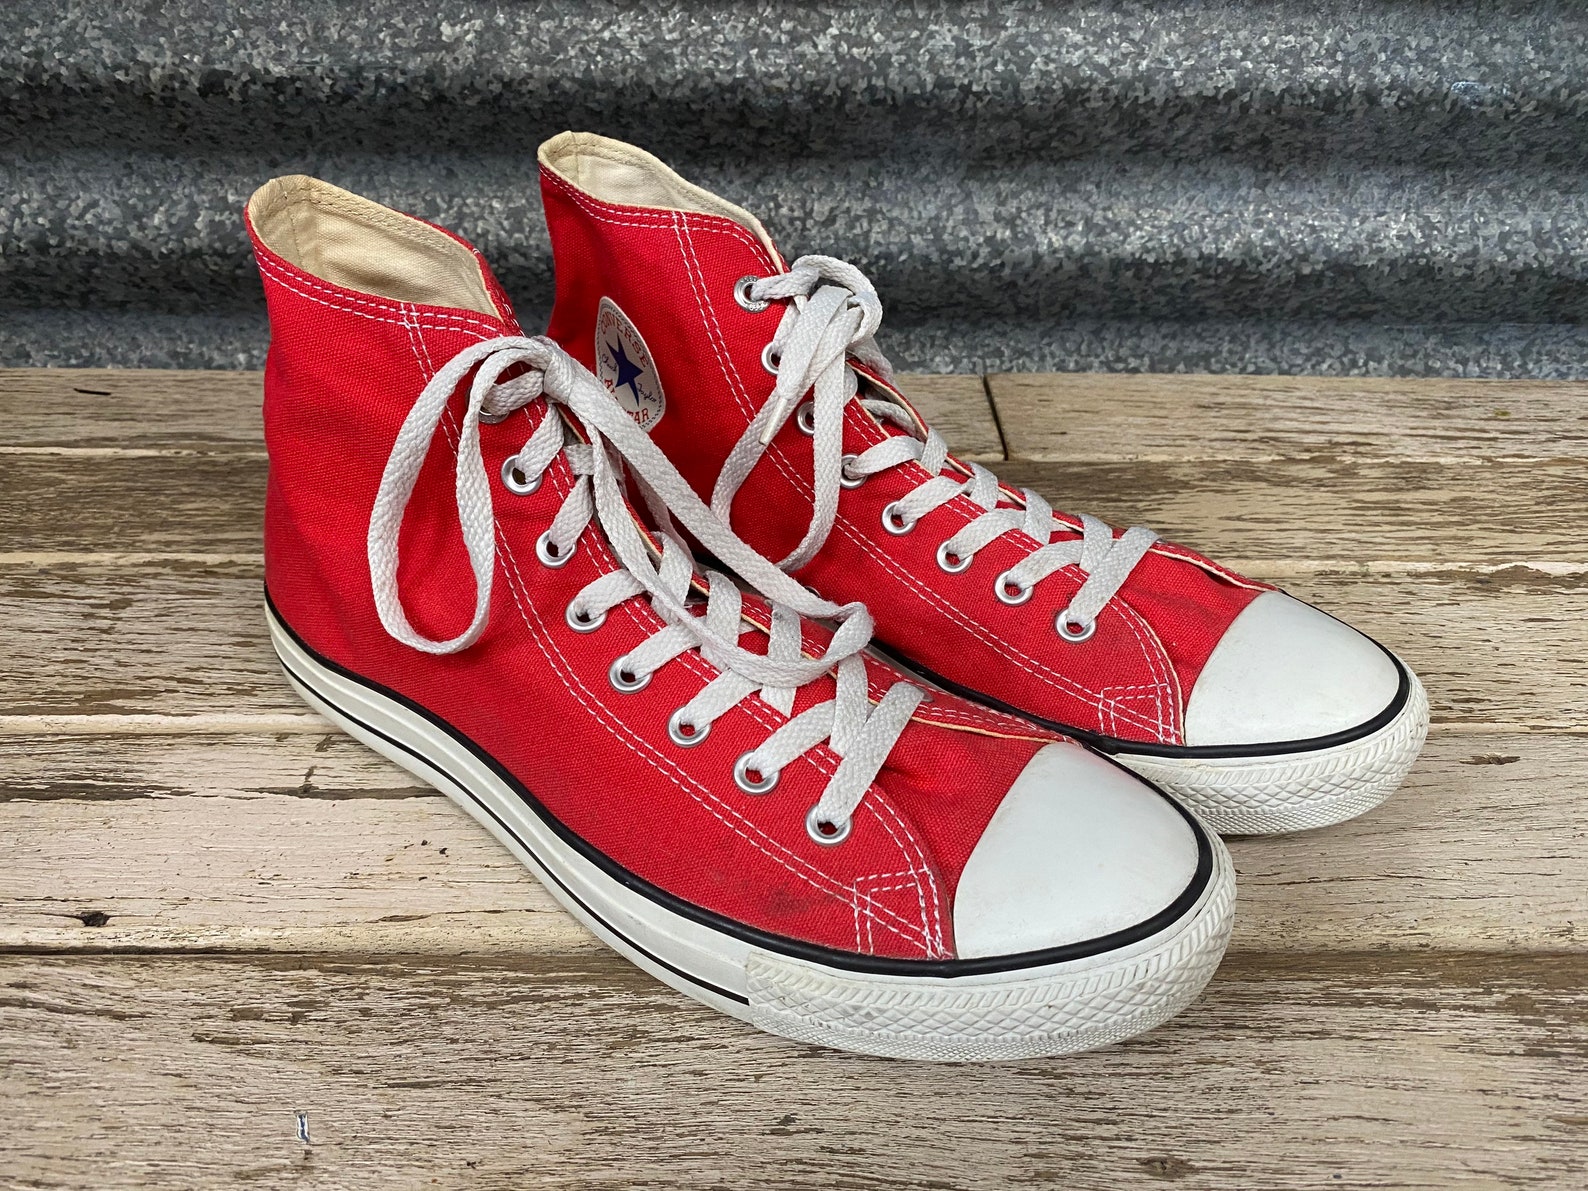 Converse High Top Chuck Taylor All Stars Red Sz 11 OOAK | Etsy